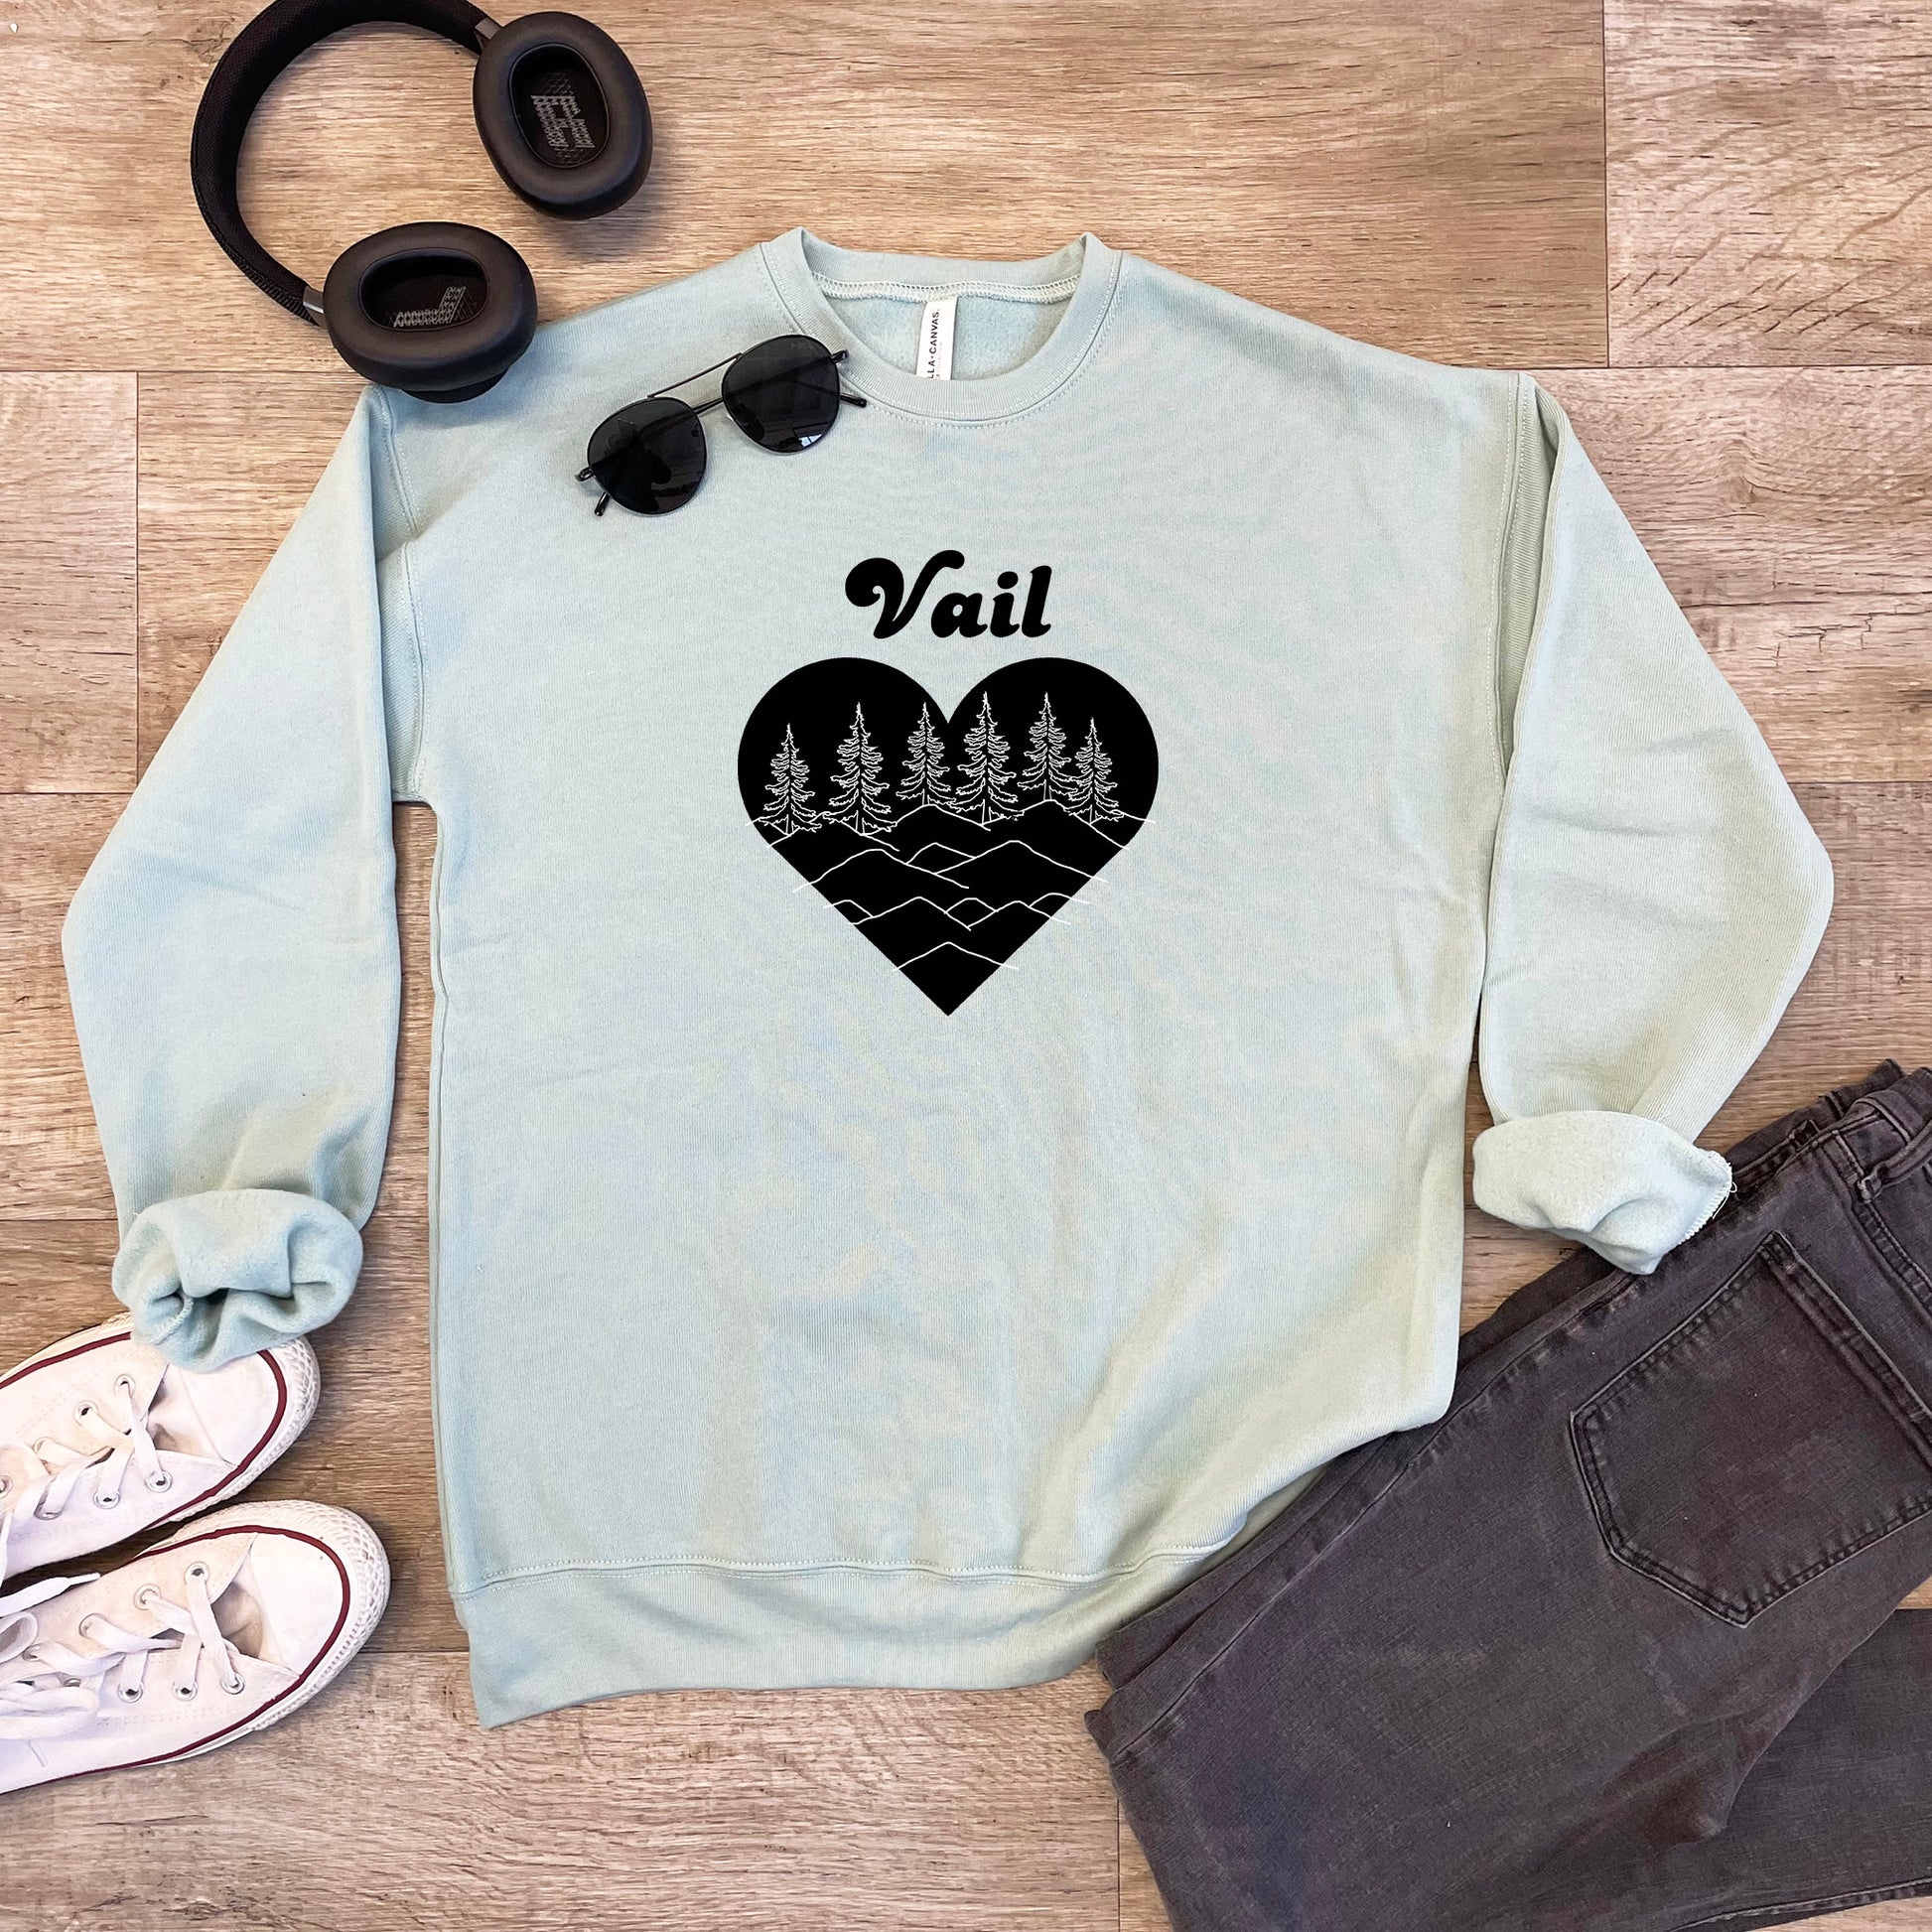 a pair of headphones and a sweatshirt with a heart on it